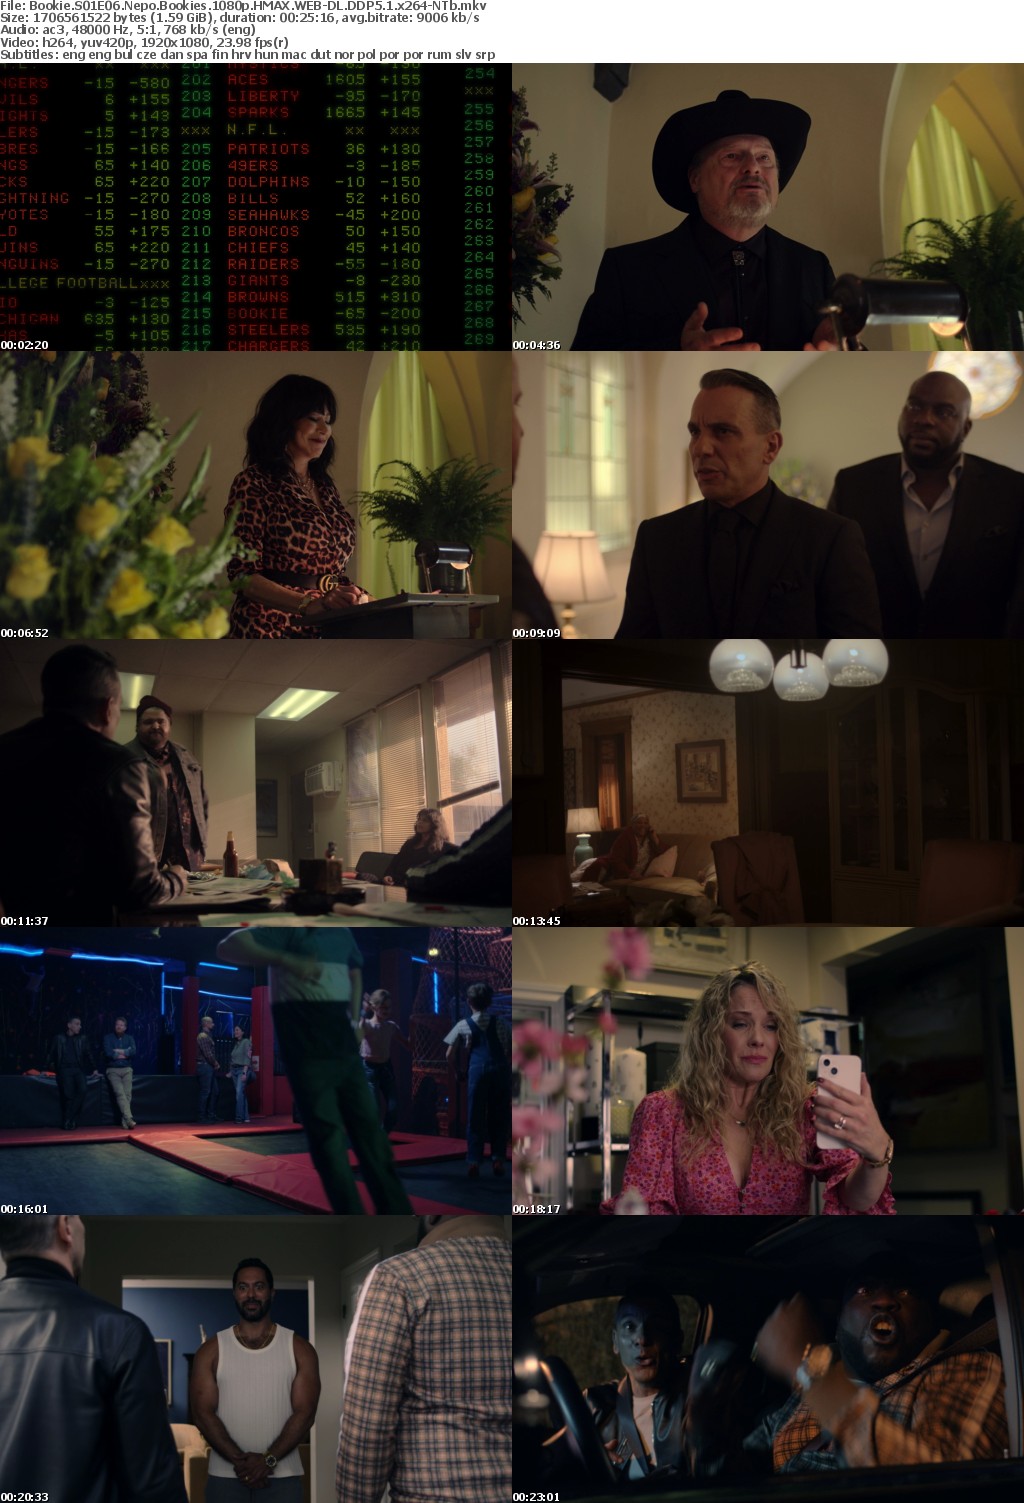 Bookie S01E06 Nepo Bookies 1080p HMAX WEB-DL DDP5 1 x264-NTb